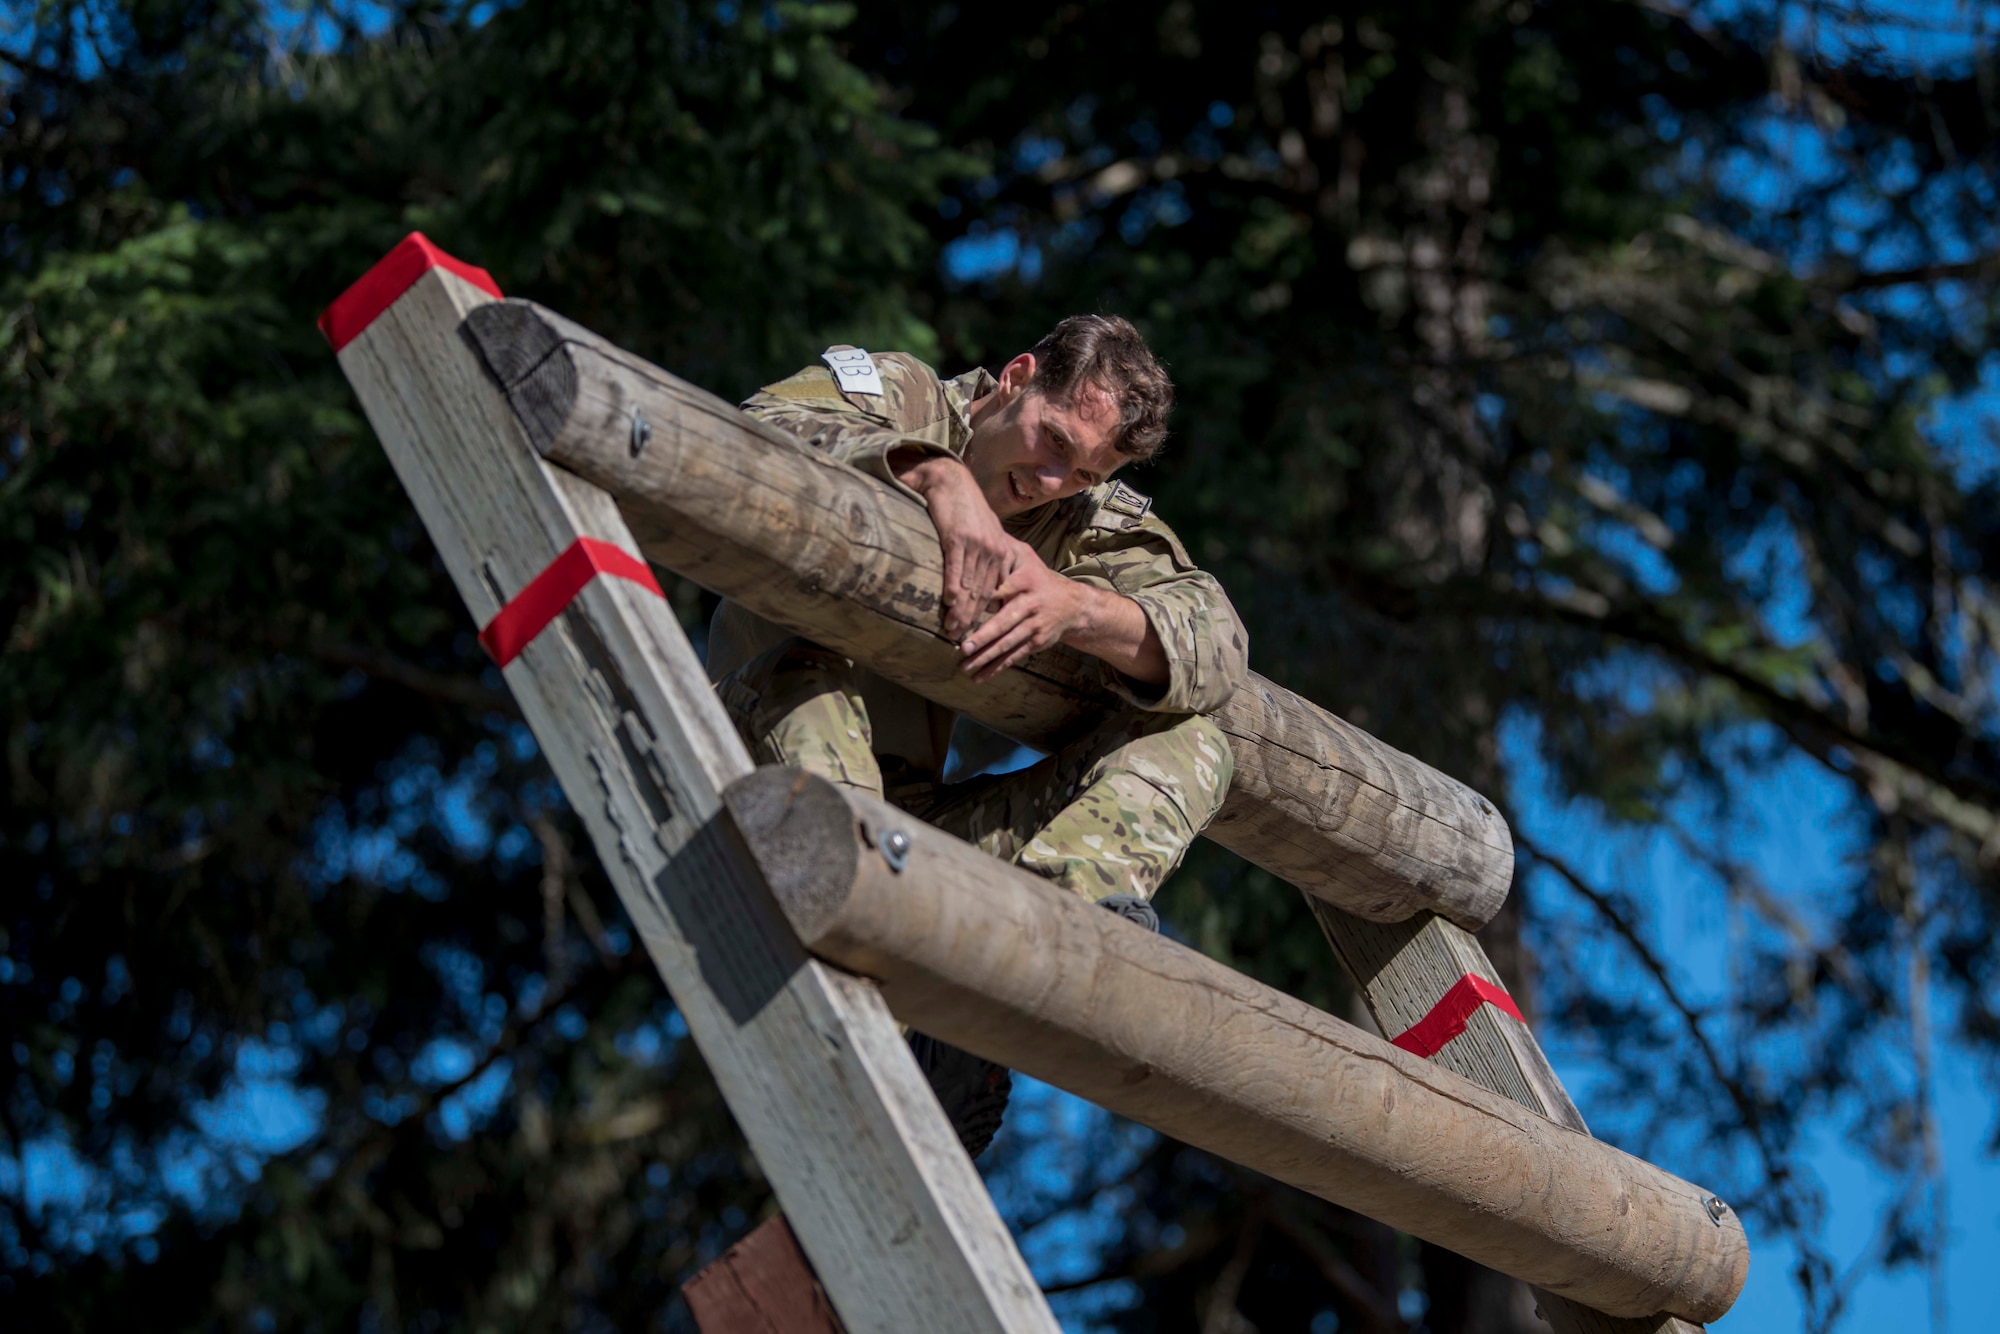 A U.S. Air Force Tactical Air Control Party Airman assigned to the 5th Air Support Operations Squadron, Joint Base Lewis-McChord (JBLM), Wash., climbs on top of an obstacle during the 2019 Lightning Challenge at JBLM, Wash., July 29, 2019.